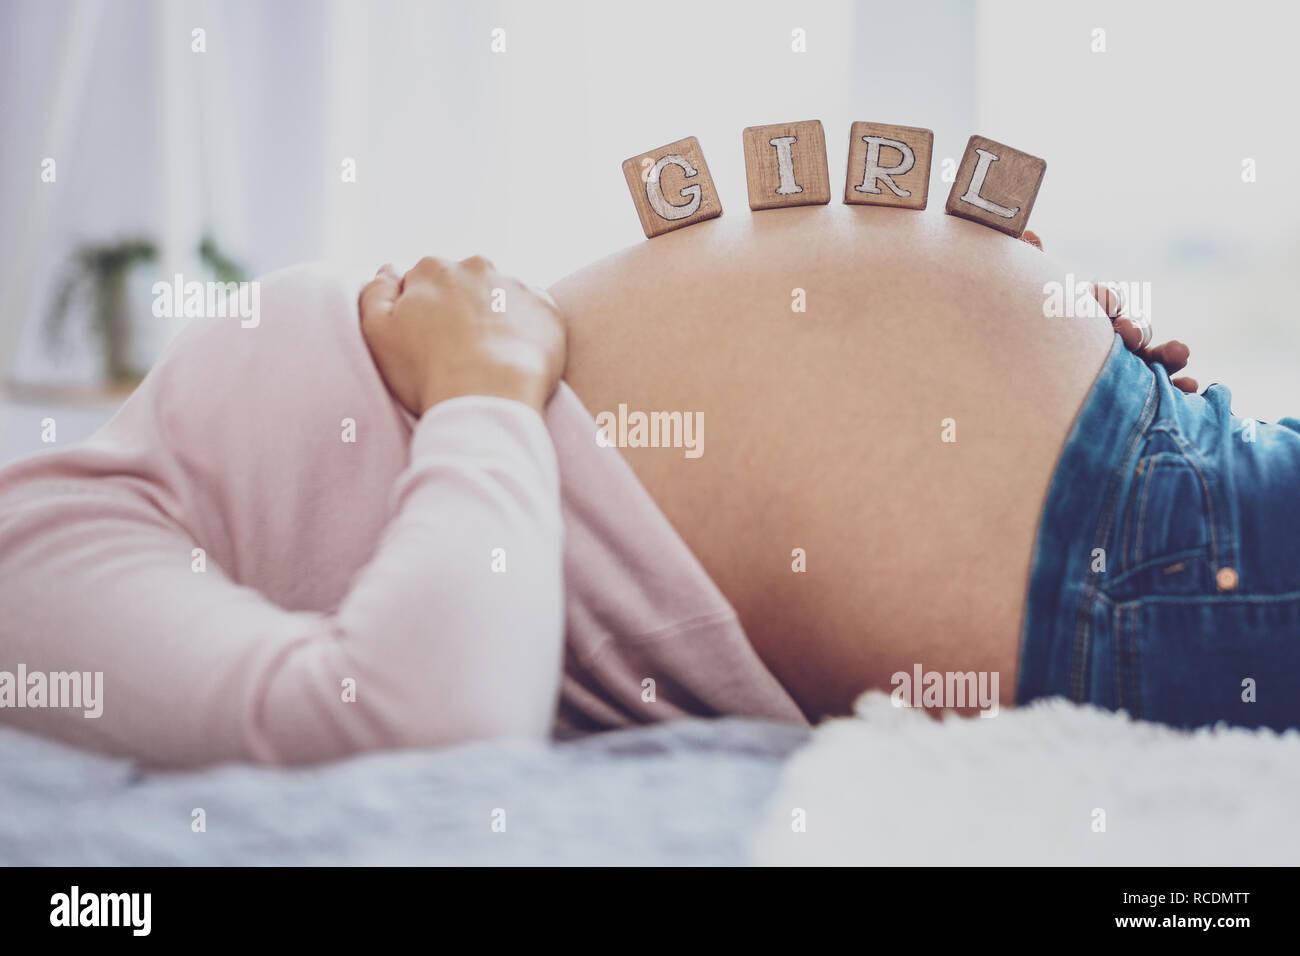 Pregnant woman holding bricks saying Girl on belly Stock Photo